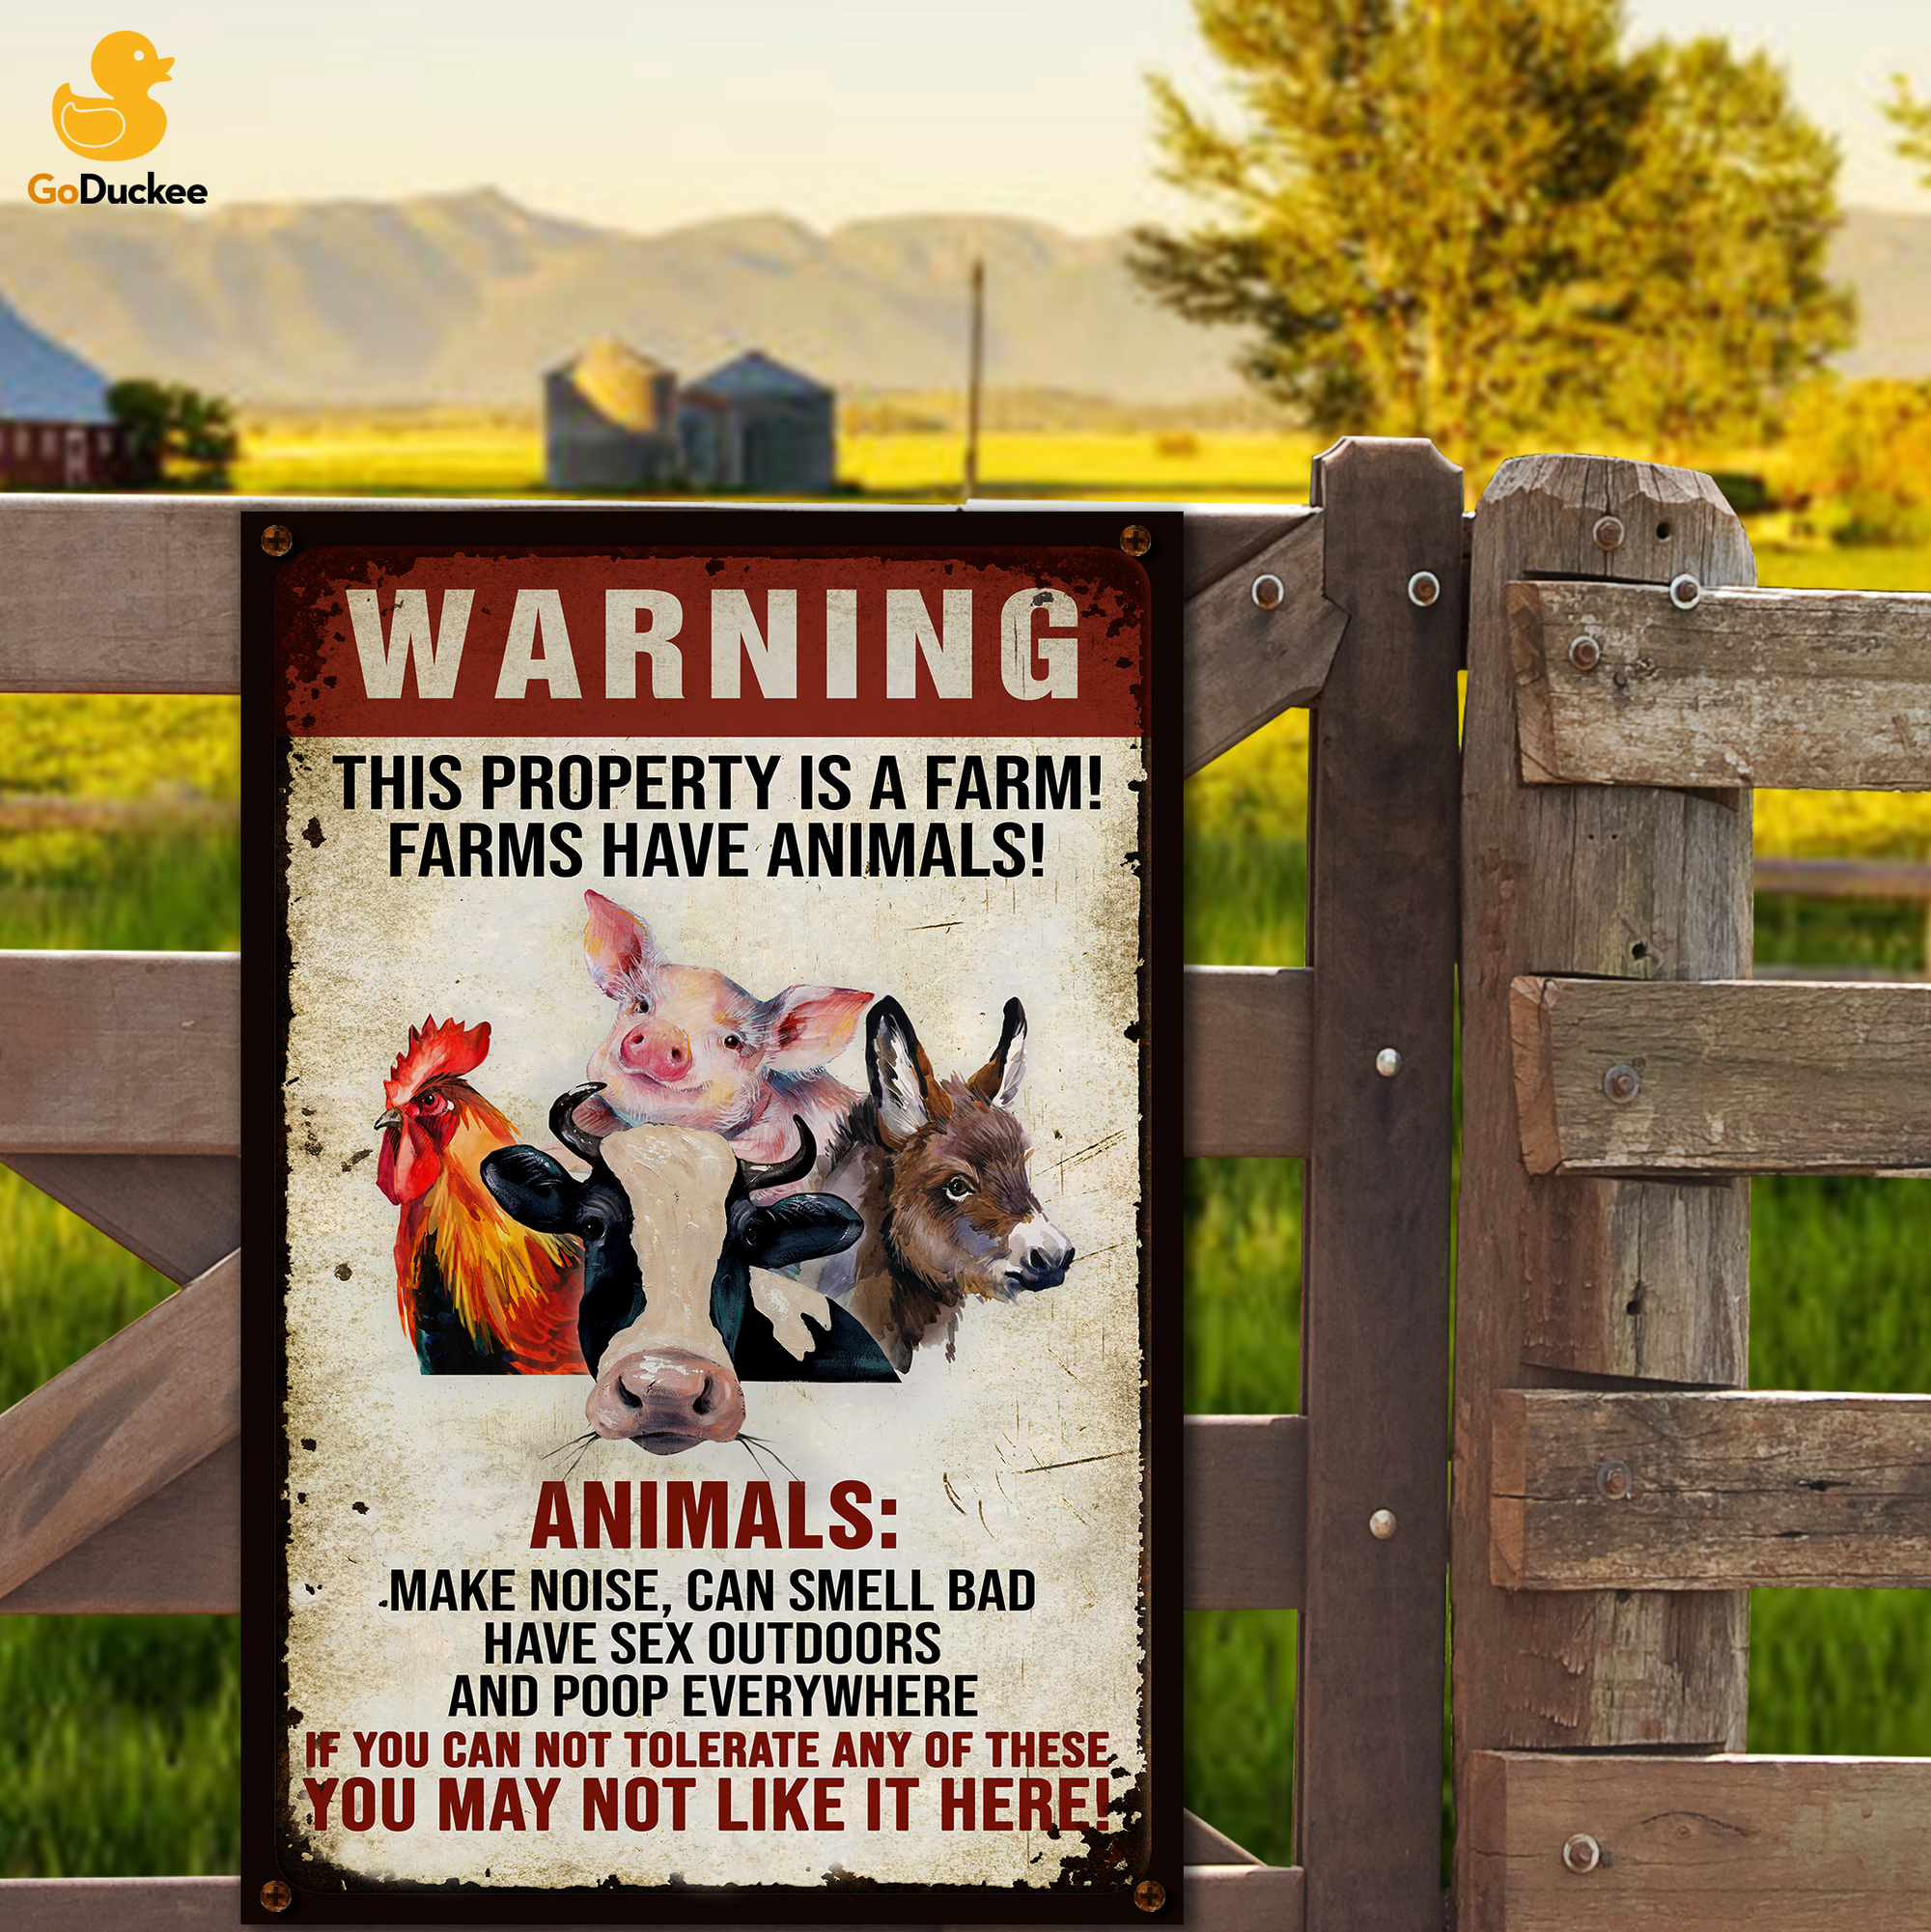 Warning Farm Metal Sign - This property is a farm - Pig, Chicken, Cow - Metal Wall Art - GoDuckee